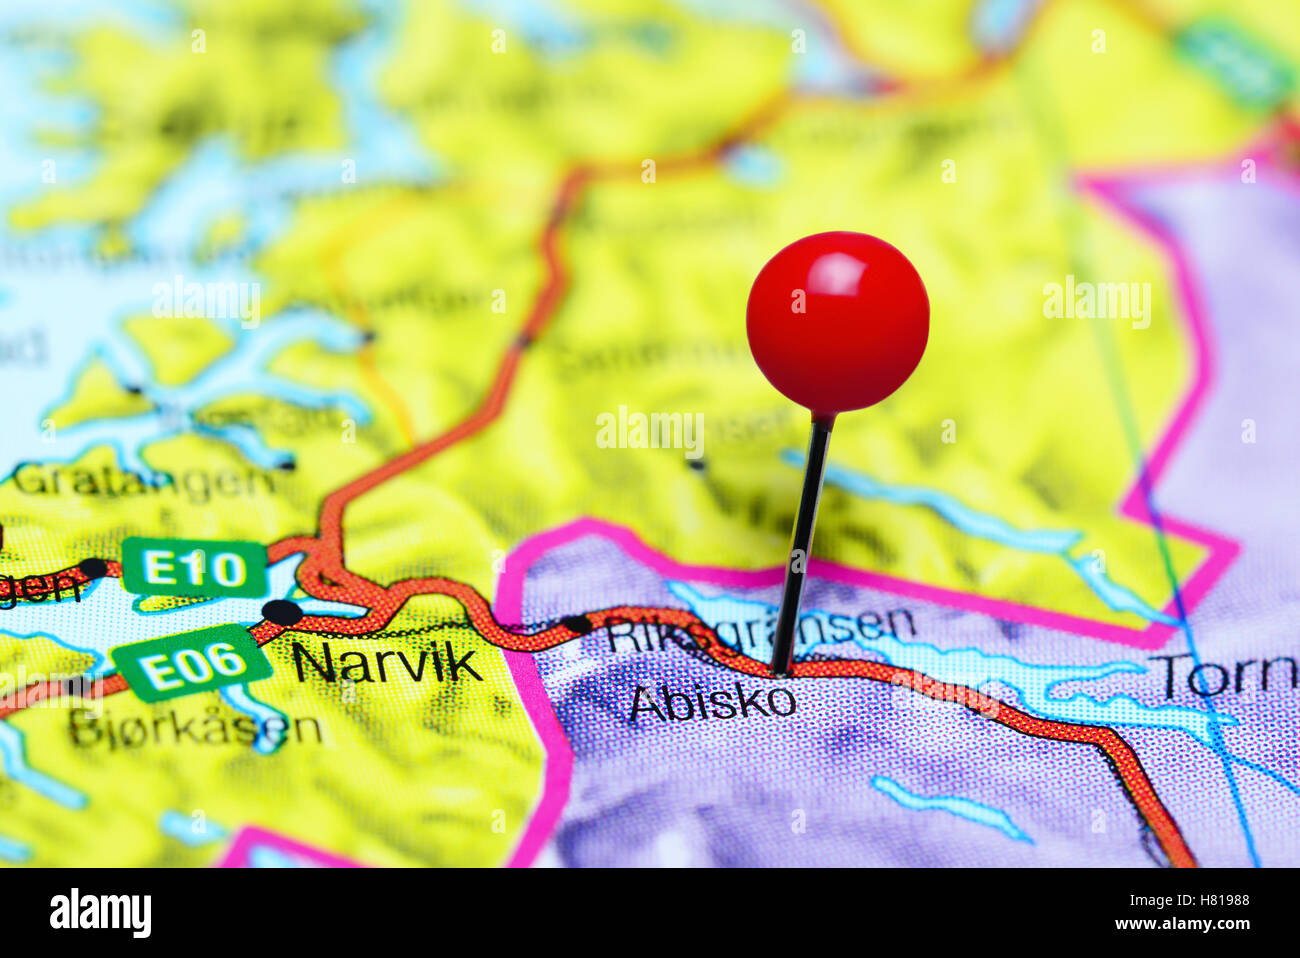 Abisko pinned on a map of Sweden Stock Photo